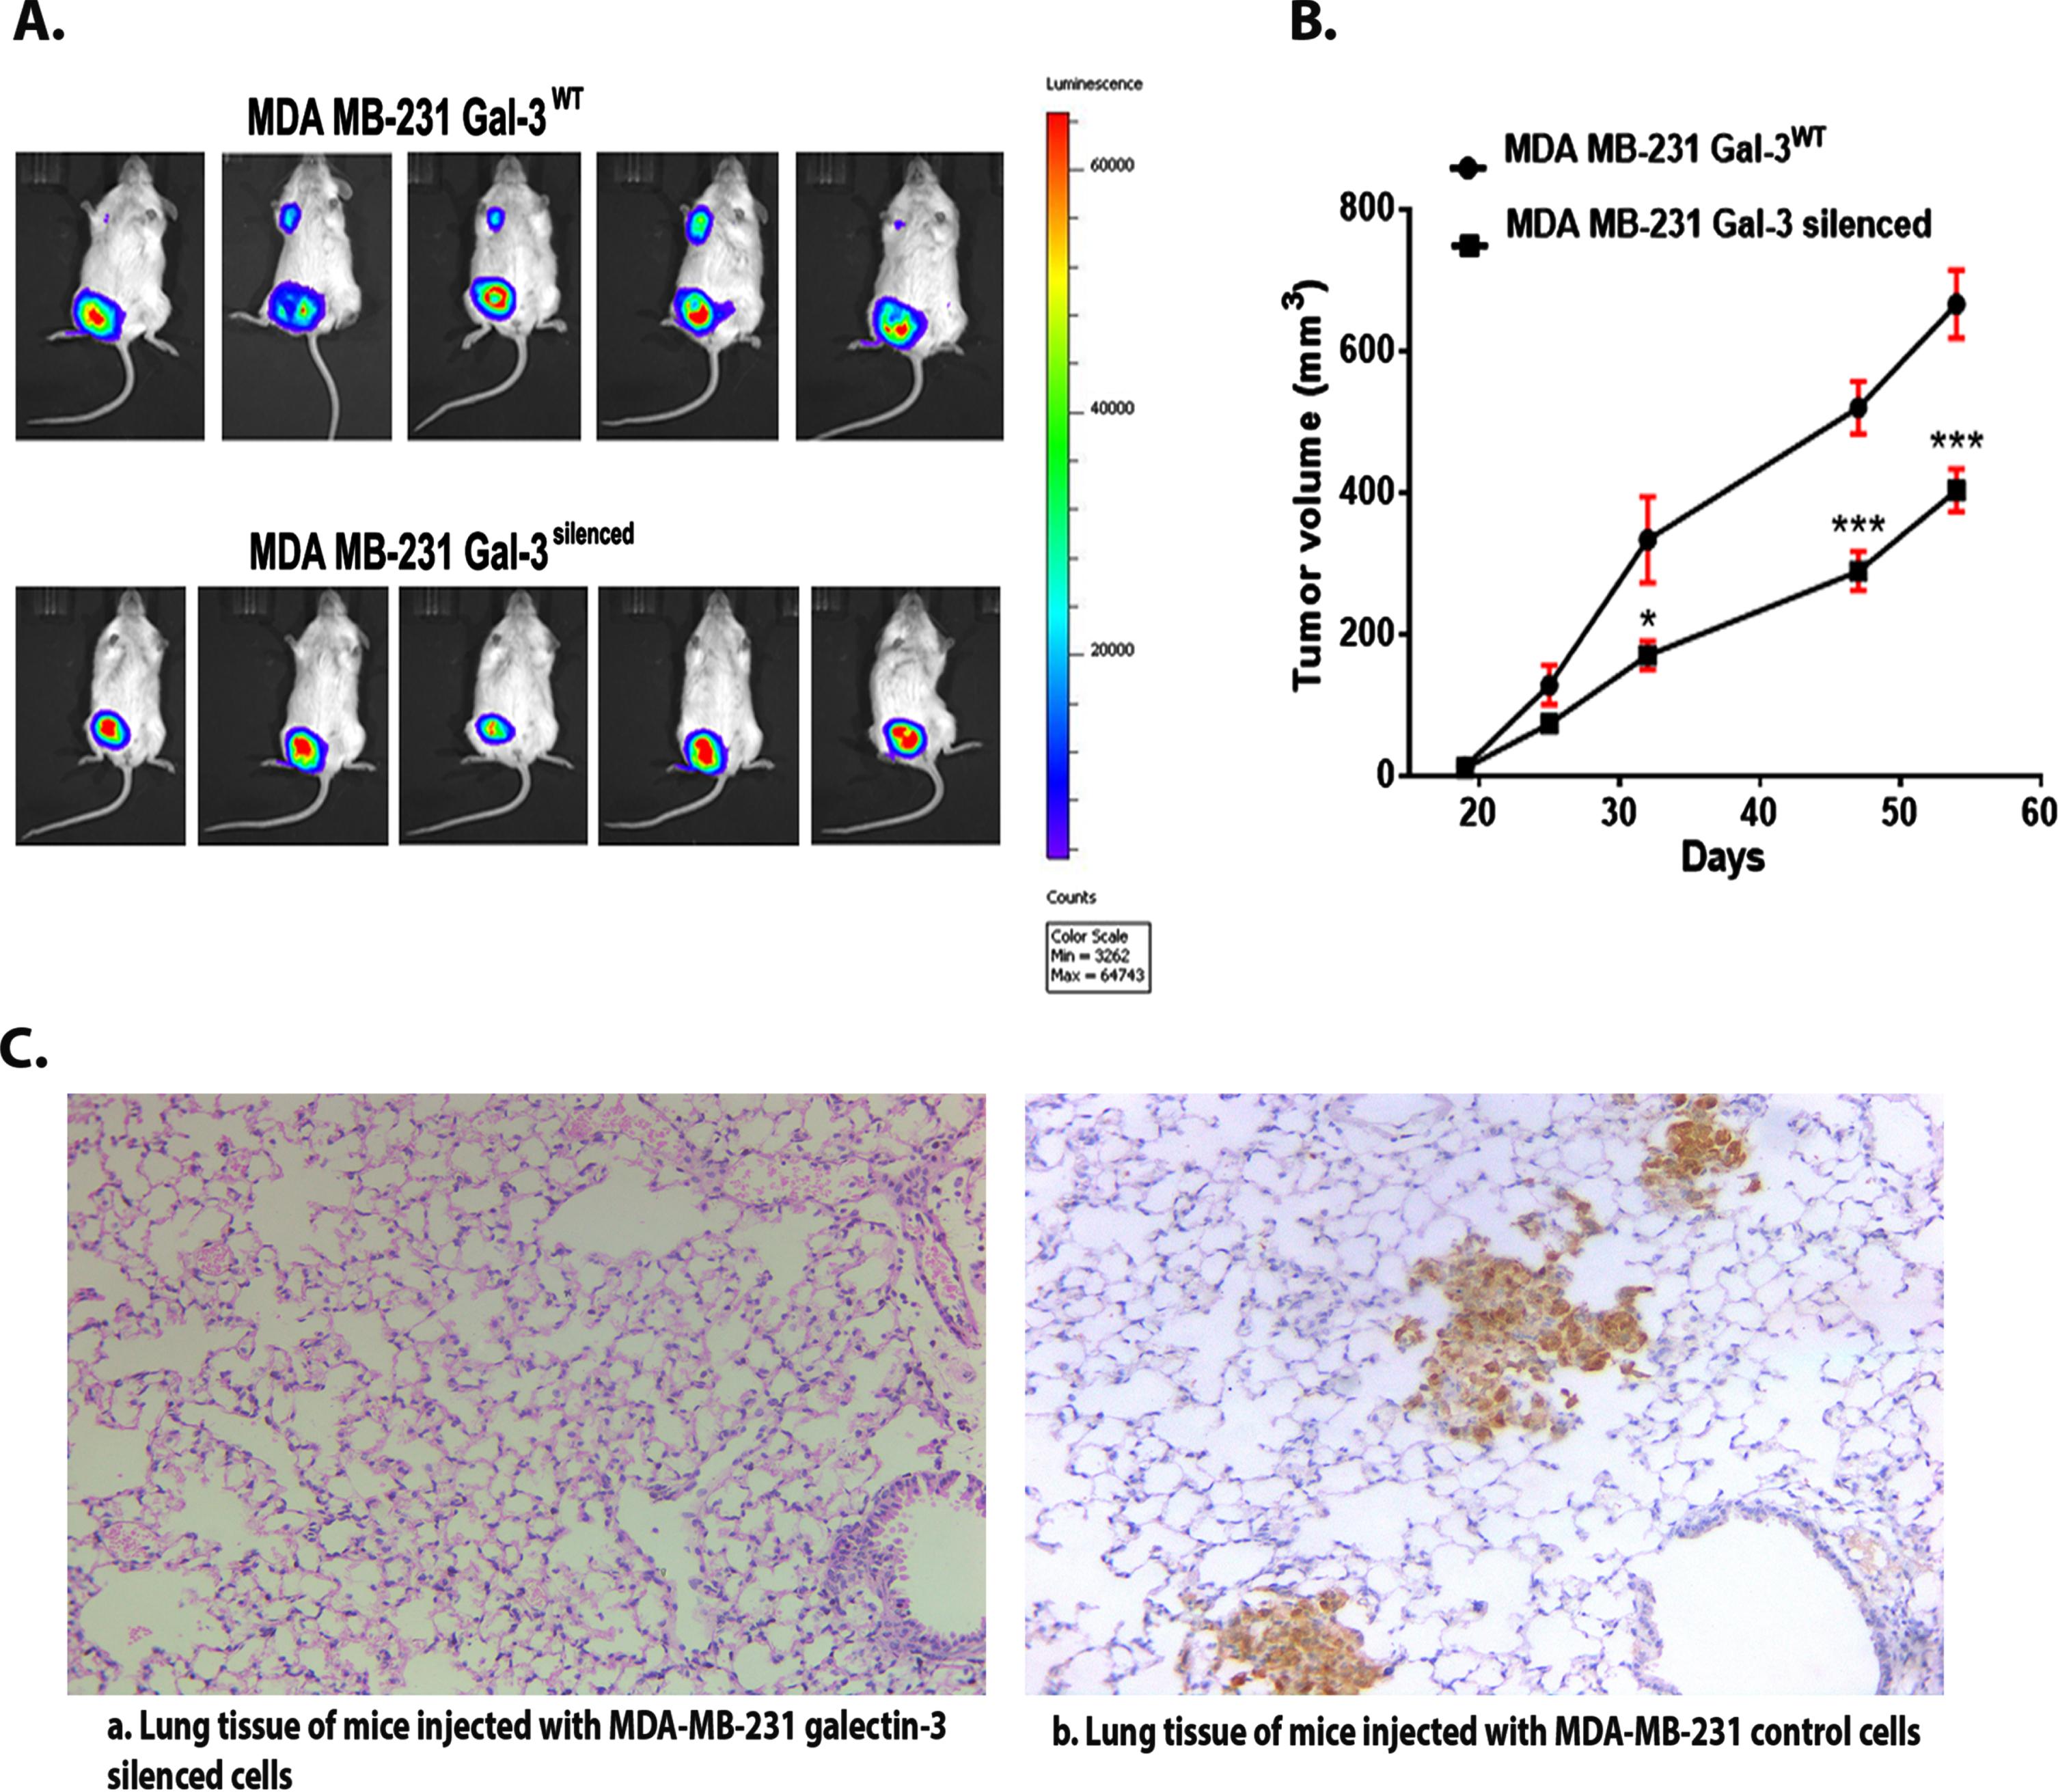 A. Real-time imaging of mice using IVIS system confirms the presence of metastatic tumor in control group compared to silenced group. B. Tumor growth curve: Quantitative evaluation of in vivo tumor growth in SCID/NOD mice. Data are expressed as means±SD (B) and are representative of two independent experiments; n = 5 each. The criteria for significance were p < 0.05 (*), p < 0.01 (**), and p < 0.001 (***) and ns means no statistical significance. C. The figure (a) shows IHC image of lung tissue containing no metastatic deposits from mice injected with MDA-MB-231 galectin-3-silenced cells (b) shows IHC image of lung tissue containing the metastatic cells from mice injected with MDA-MB-231 galectin-3-expressing cells (Magnification = 10 X).